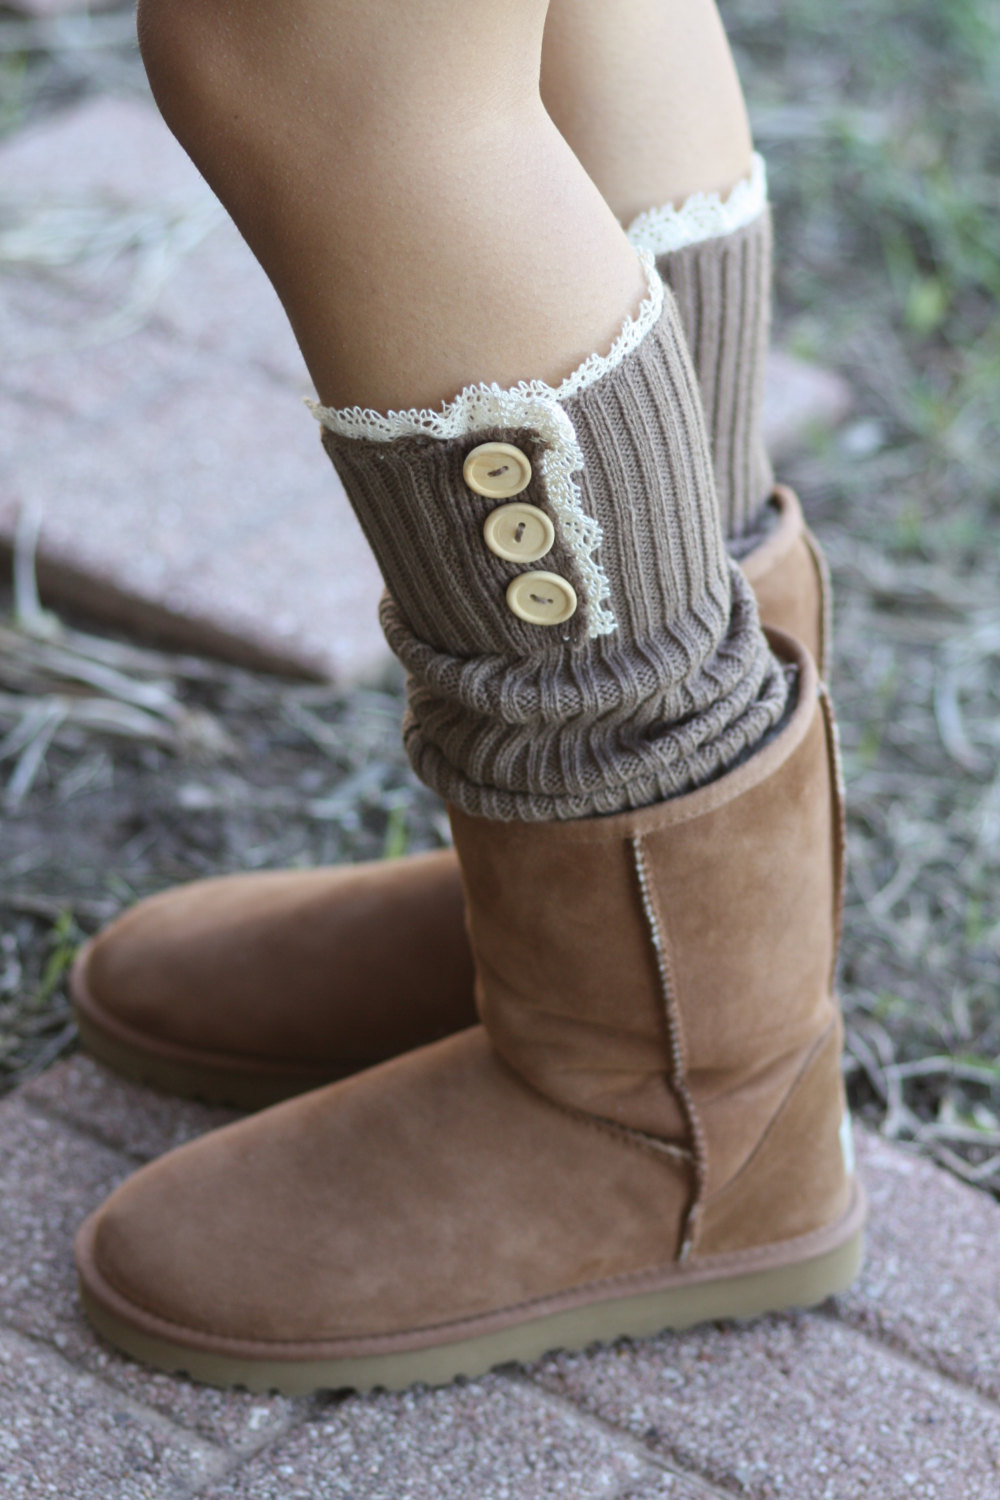 LimitedTime Sale Legwarmers - Knitted, Tan, Brown, Wood Buttons, Cotton, Organic , Boot Cover, Socks, Crochet, Lace Trim, Christmas Gift,